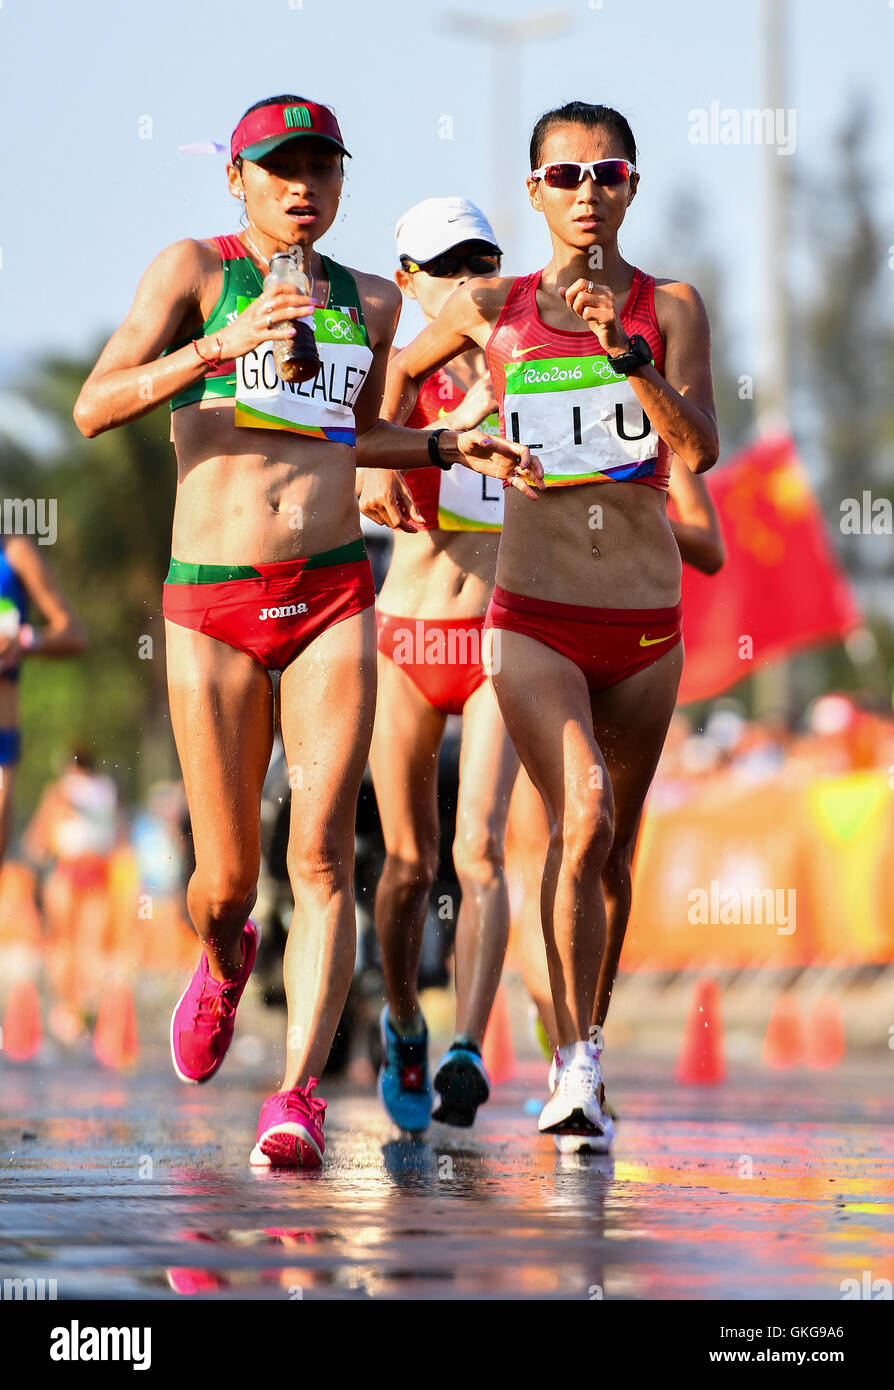 Rio de Janeiro, Brazil. 19th August, 2016. Maria Gonzalez of Mexico and Hong Liu of China during the womens 20km race walk on Day 14 of the 2016 Rio Olympics at Pontal on August 19, 2016 in Rio de Janeiro, Brazil. (Photo by Roger Sedres/Gallo Images) Credit:  Roger Sedres/Alamy Live News Stock Photo